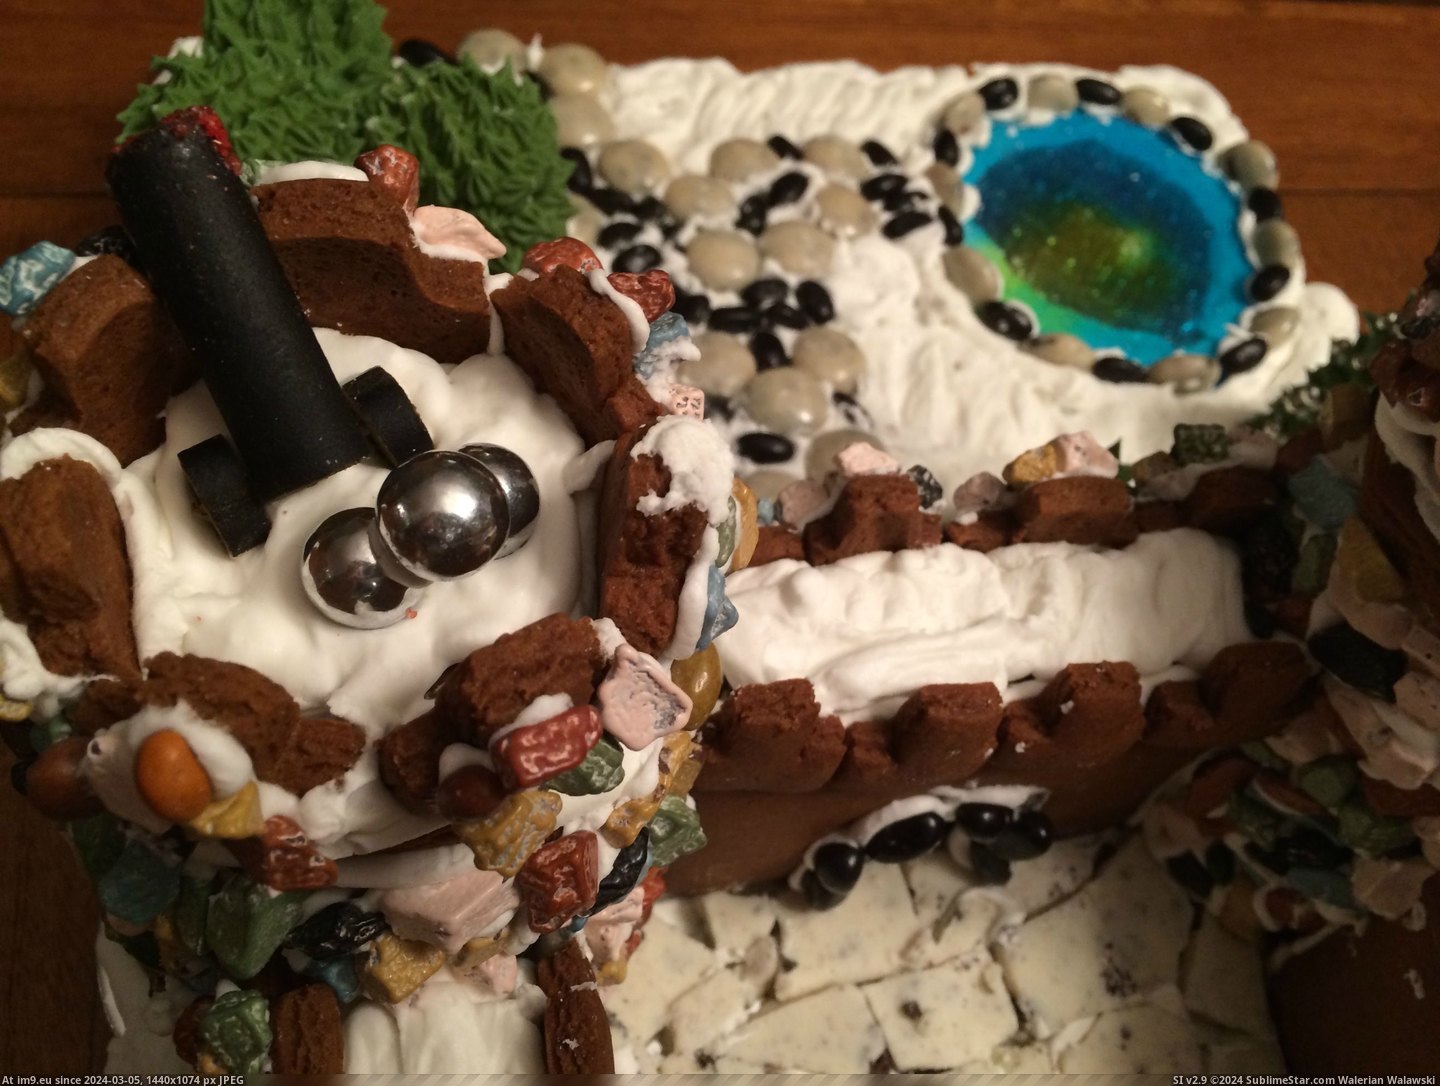 #Husband #Get #Our #Divorced #Collaborated #Project #Gingerbread #Success [Pics] My husband and I collaborated on our first gingerbread project and didn't get divorced...success! 7 Pic. (Изображение из альбом My r/PICS favs))